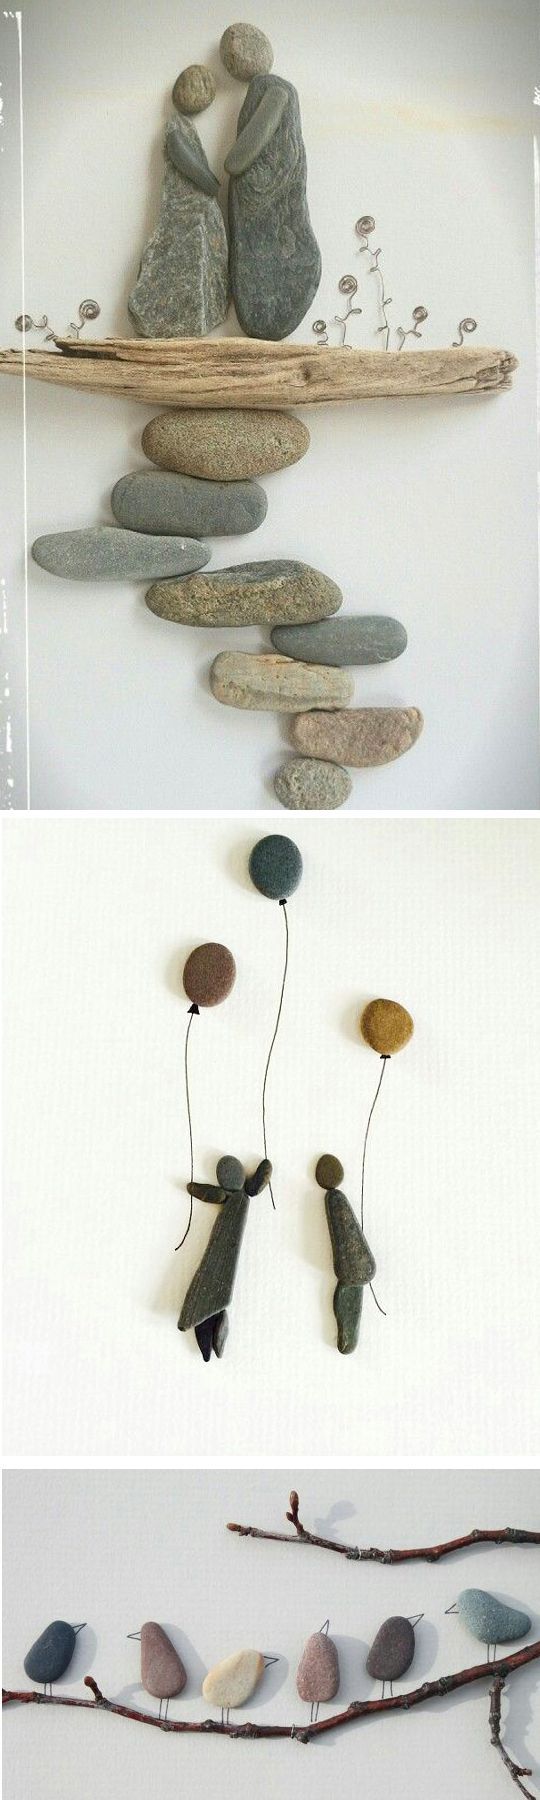 Beautiful inspiration for art with rocks, twigs and other nature items. Natural art would be perfect for a garden or canvas.